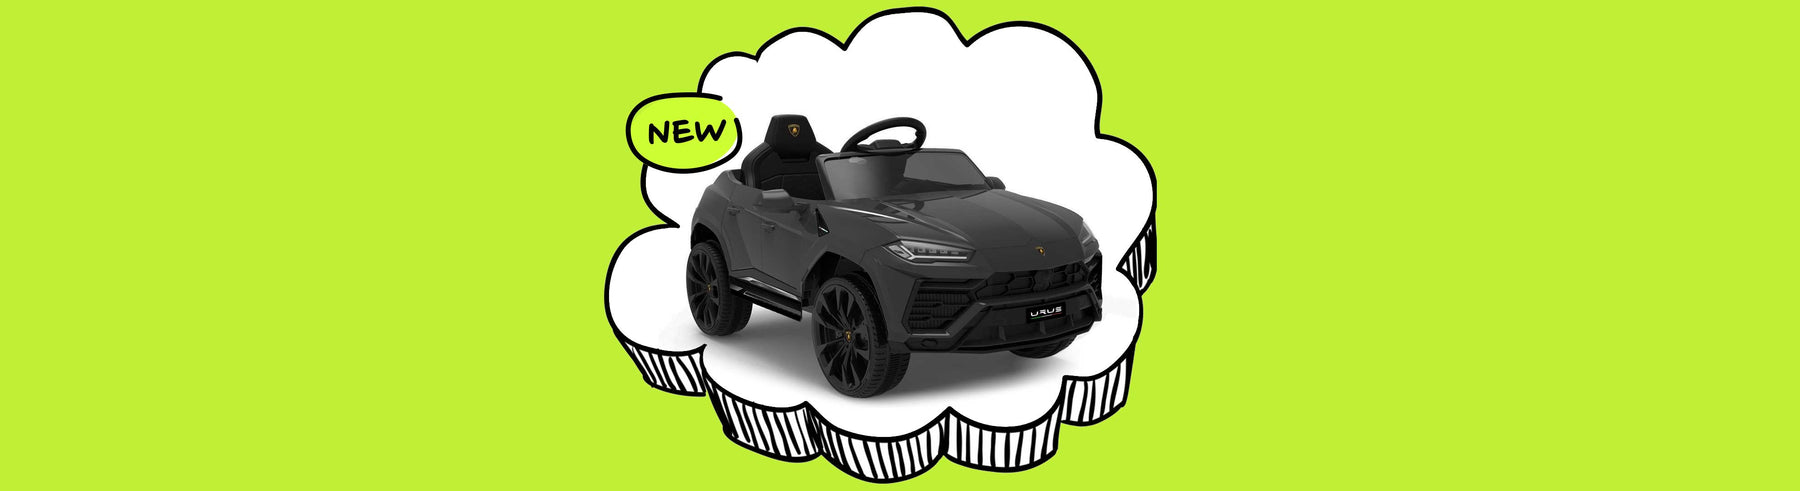 Lamborghini Officially Licensed URUS Kids Ride On Car with Remote Control